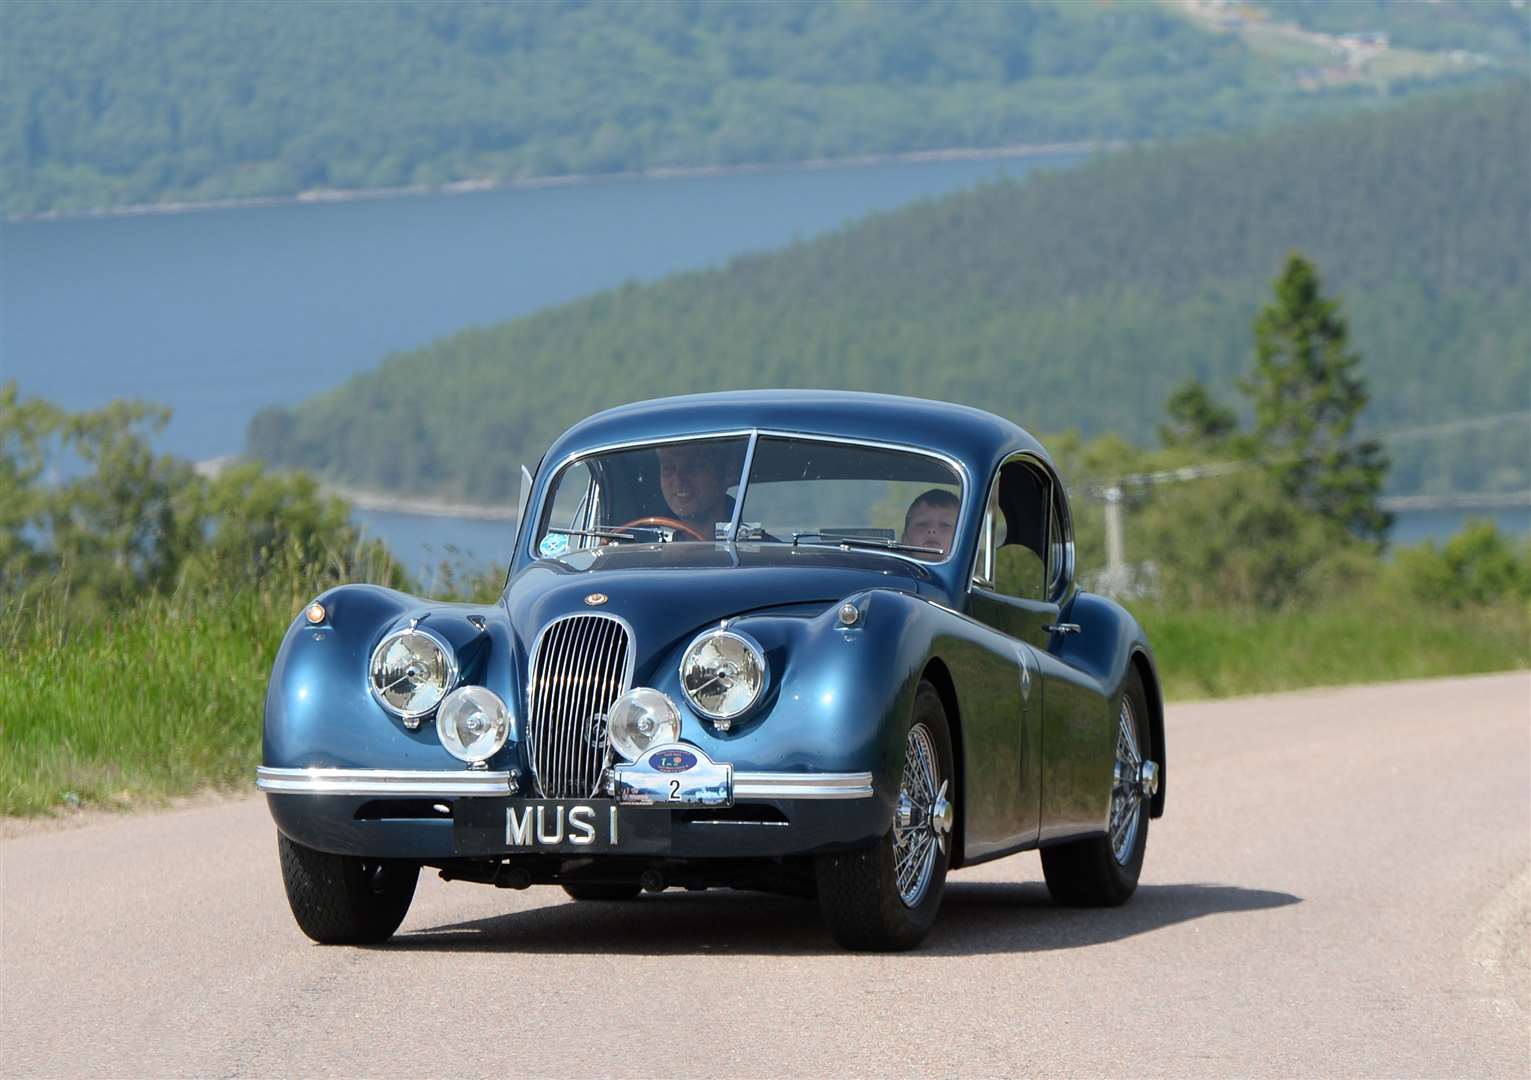 Loch Ness Classic and Vintage Car Tour..1954 Jaguar XK120 high above Dores...Picture: Gary Anthony. Image No.041274.